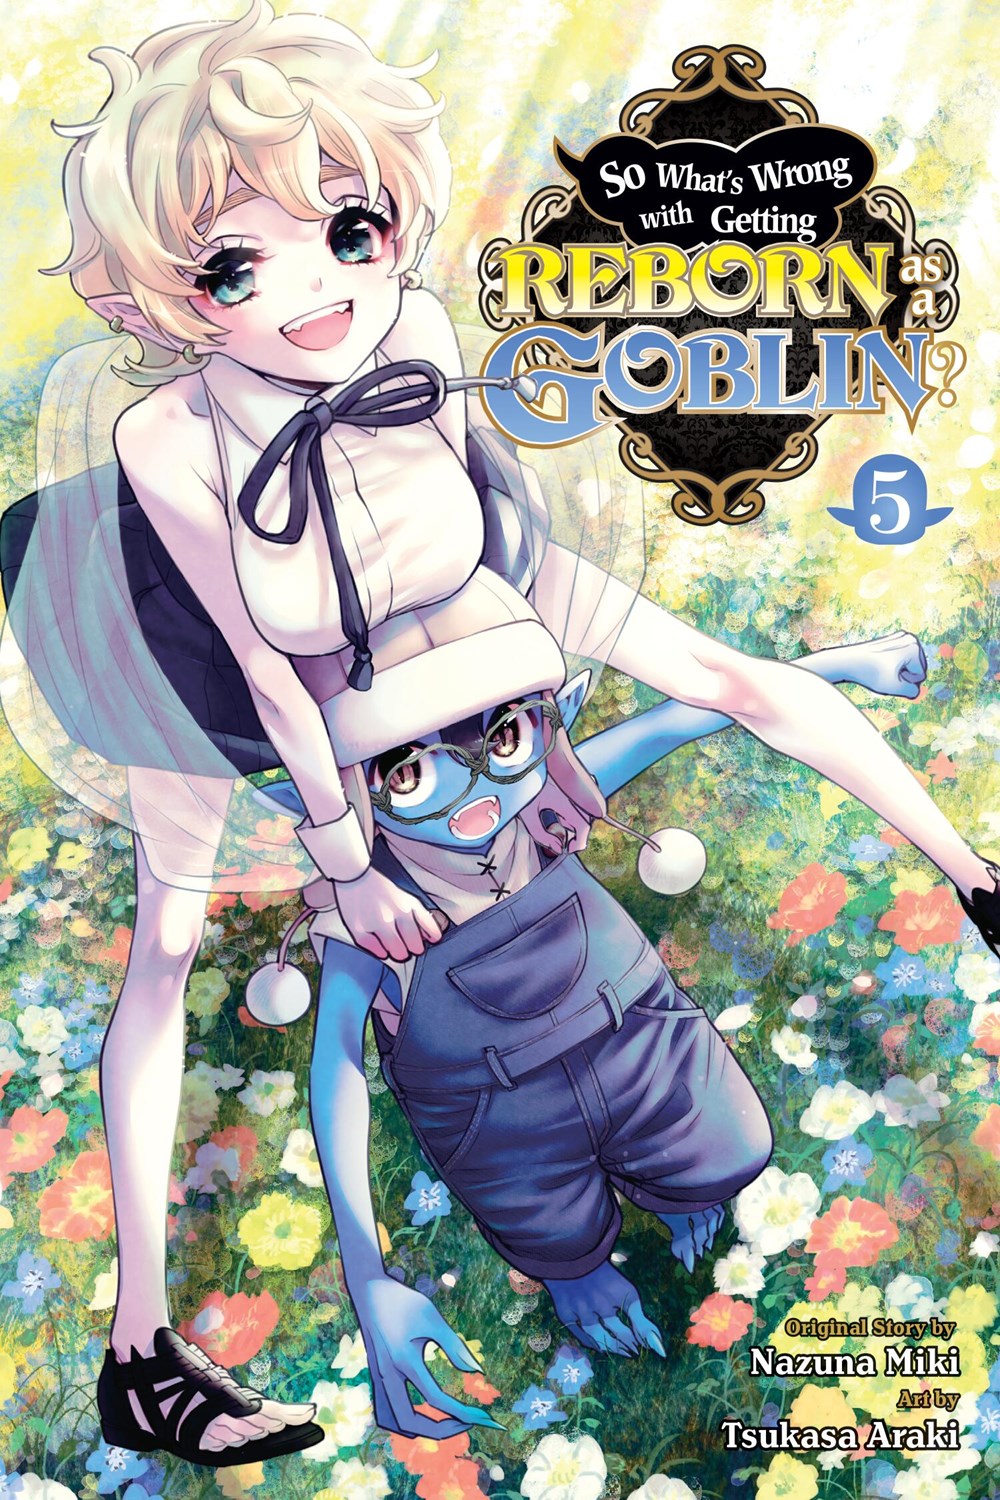 So What's Wrong with Getting Reborn as a Goblin? Manga Volume 5 image count 0